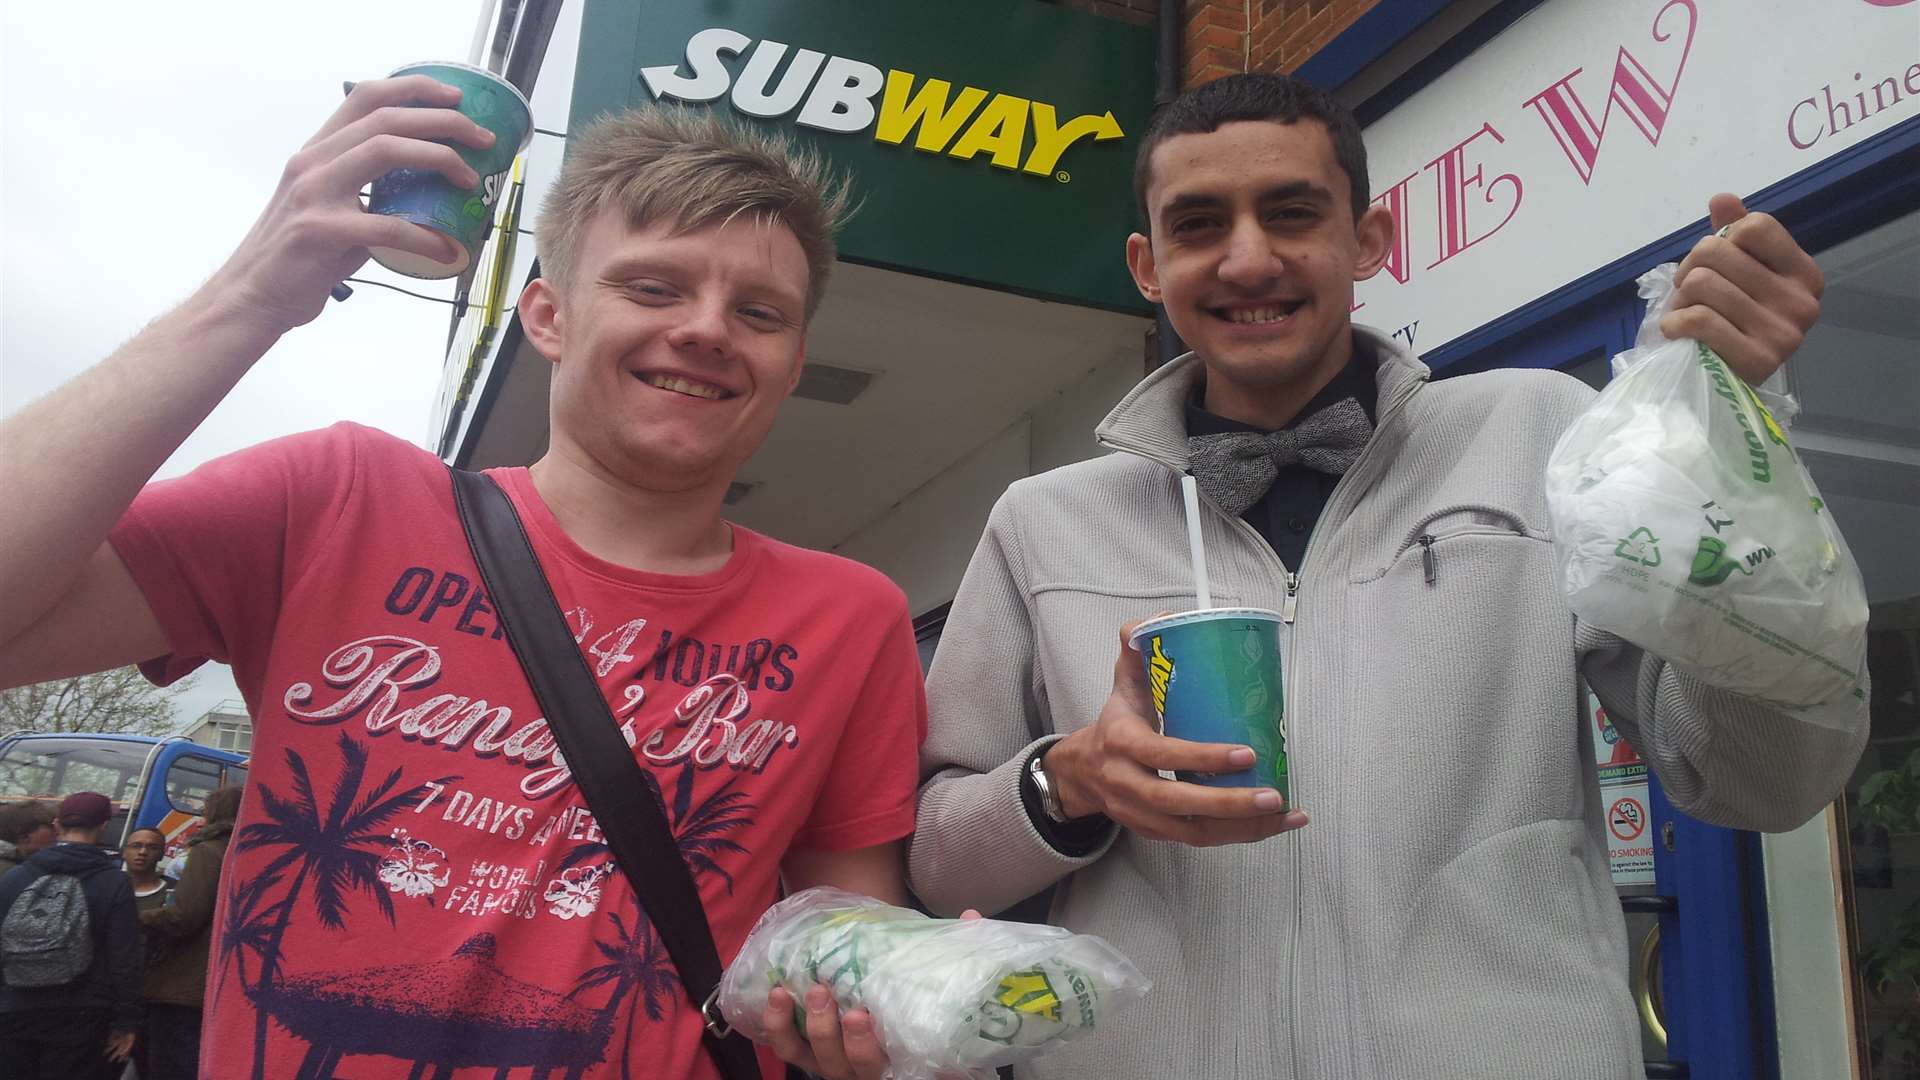 Among those queueing for a free Subway were students John Rose, left, and Jordan Cook